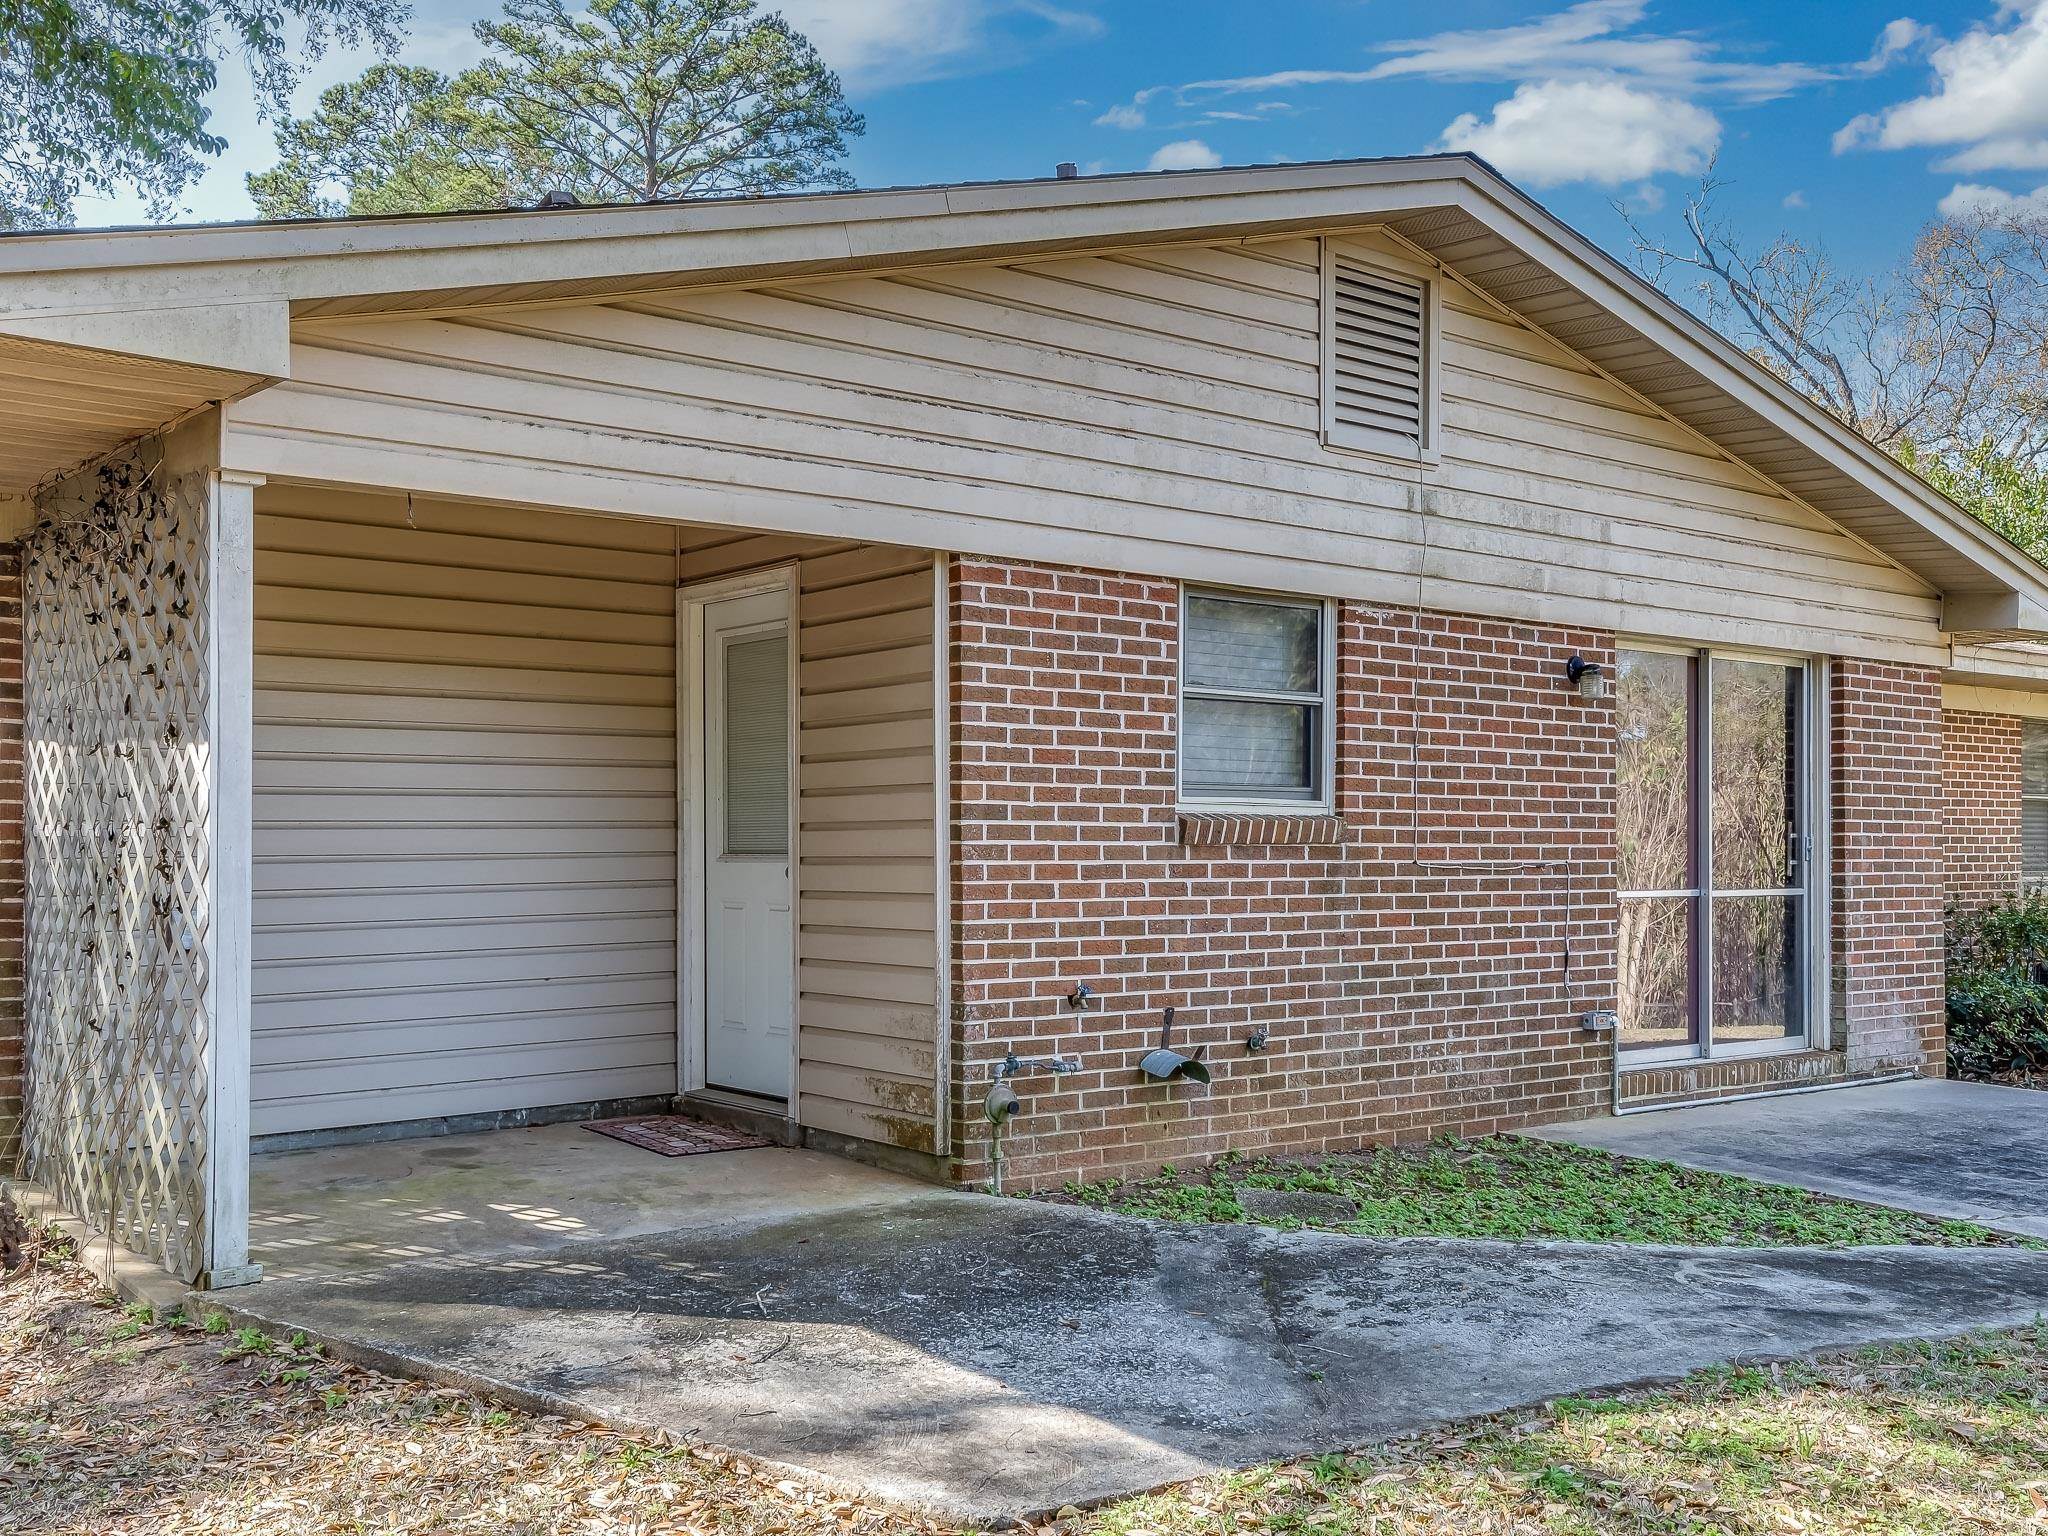 916 Chestwood Avenue,TALLAHASSEE,Florida 32303,3 Bedrooms Bedrooms,2 BathroomsBathrooms,Detached single family,916 Chestwood Avenue,368648